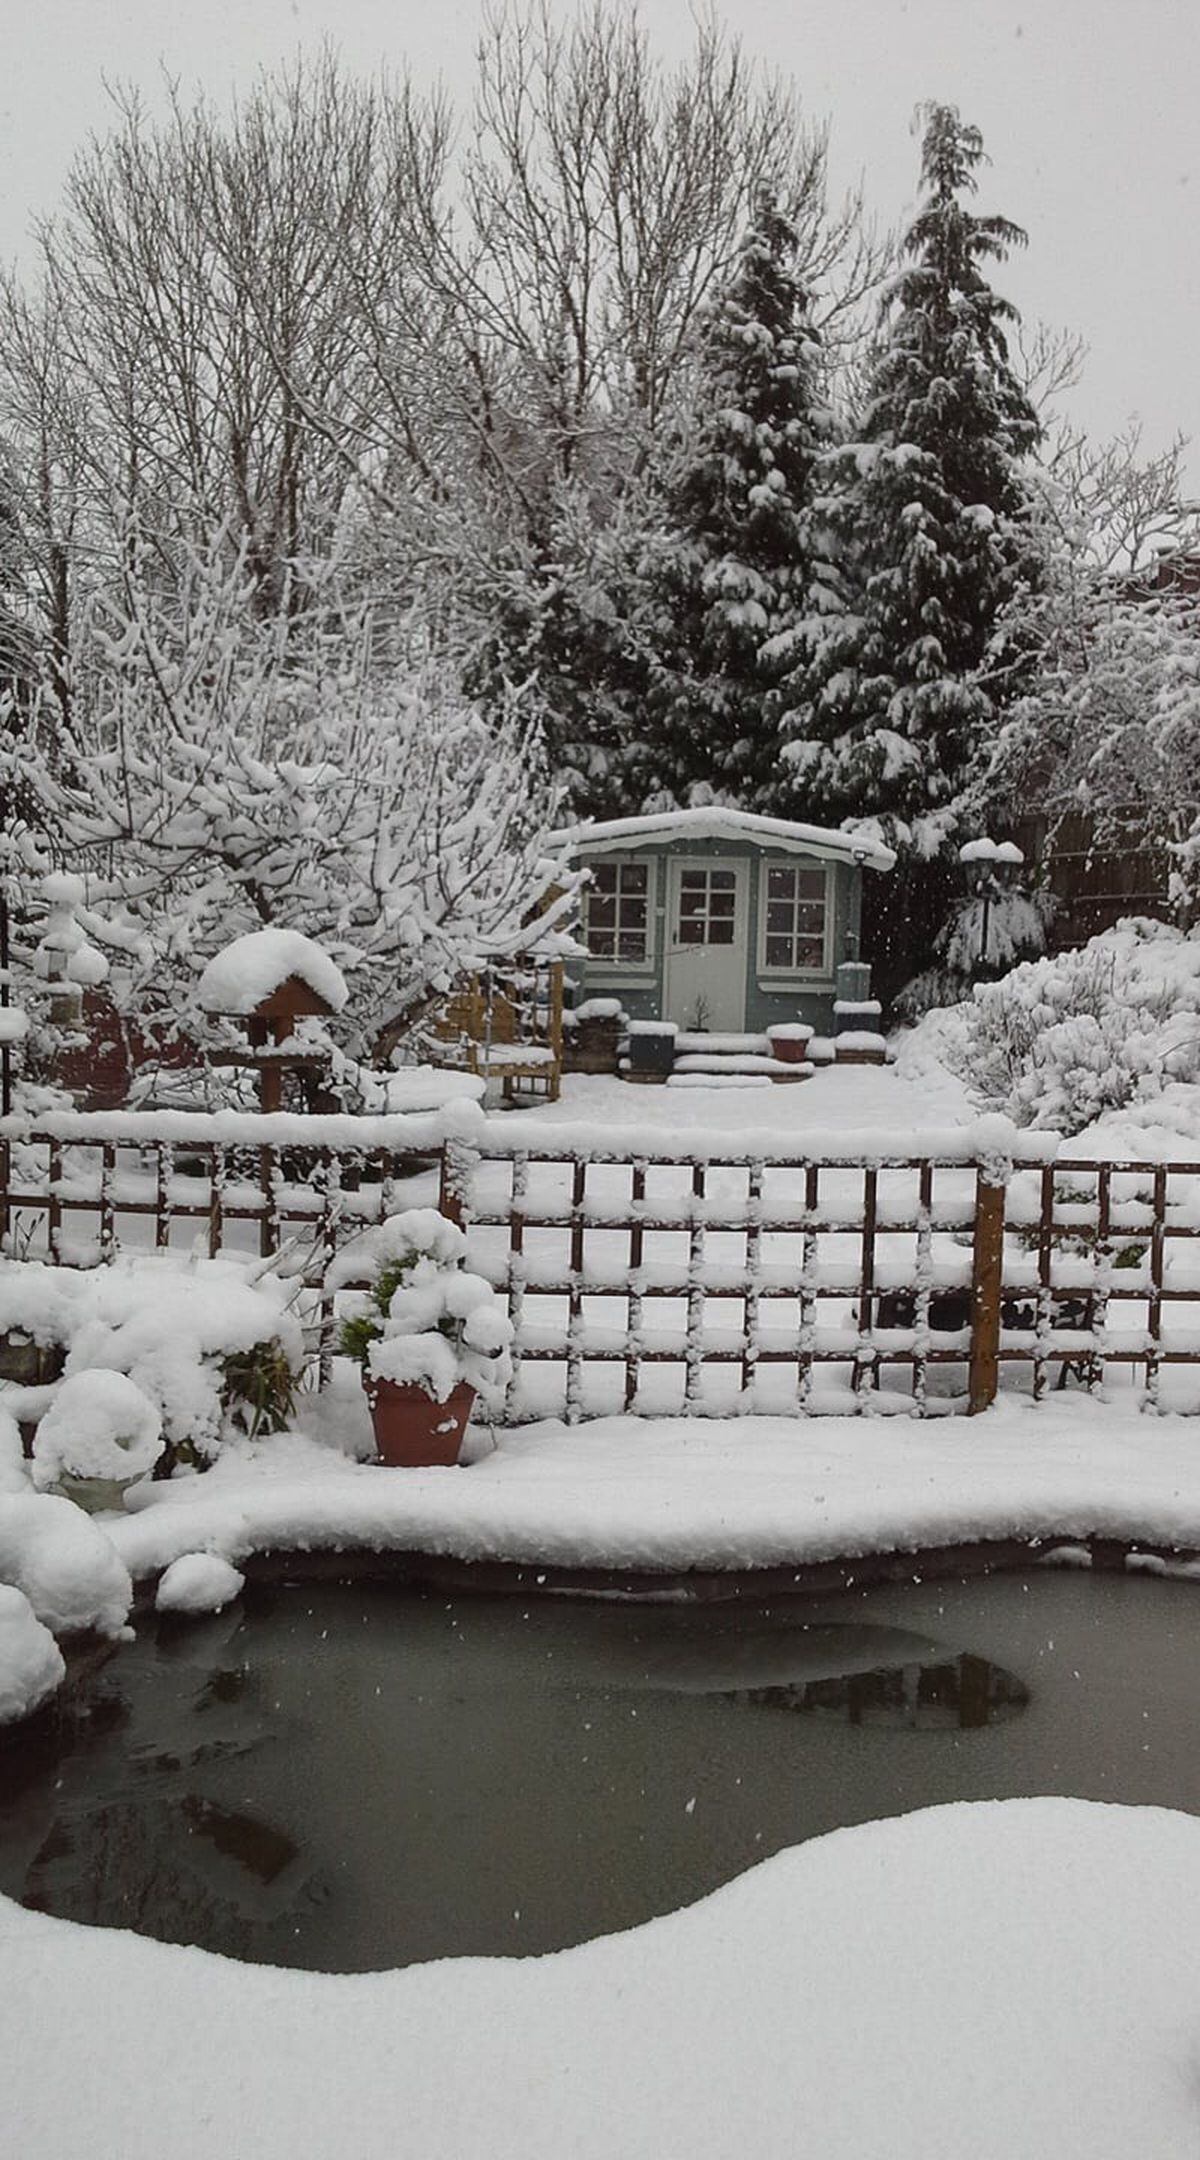 Gillian Dunn took this picture of her back garden covered in snow in Wordsley